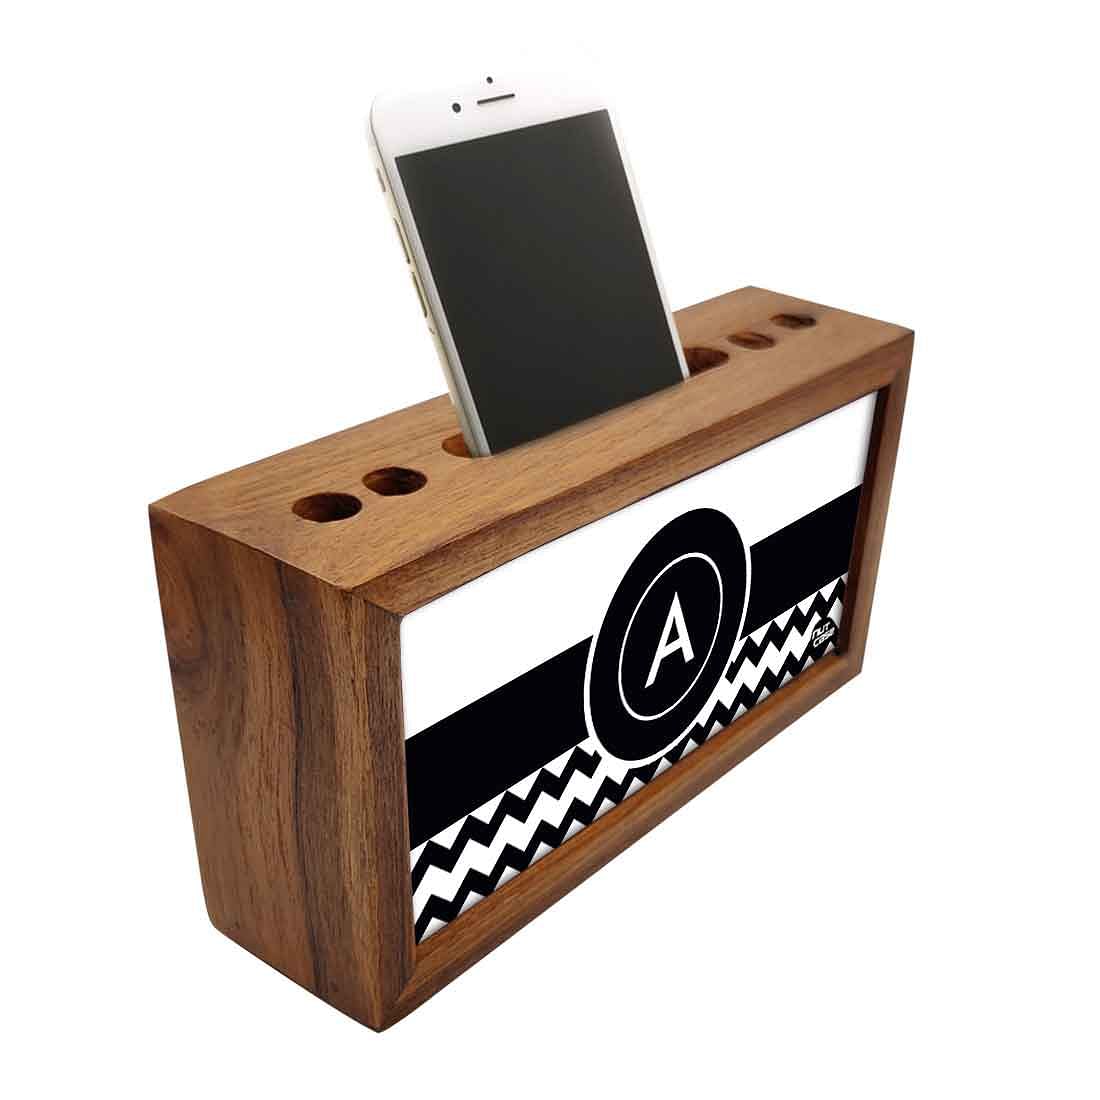 Custom-Made Wooden Pen Stand for Office - Black and White Pattern Nutcase